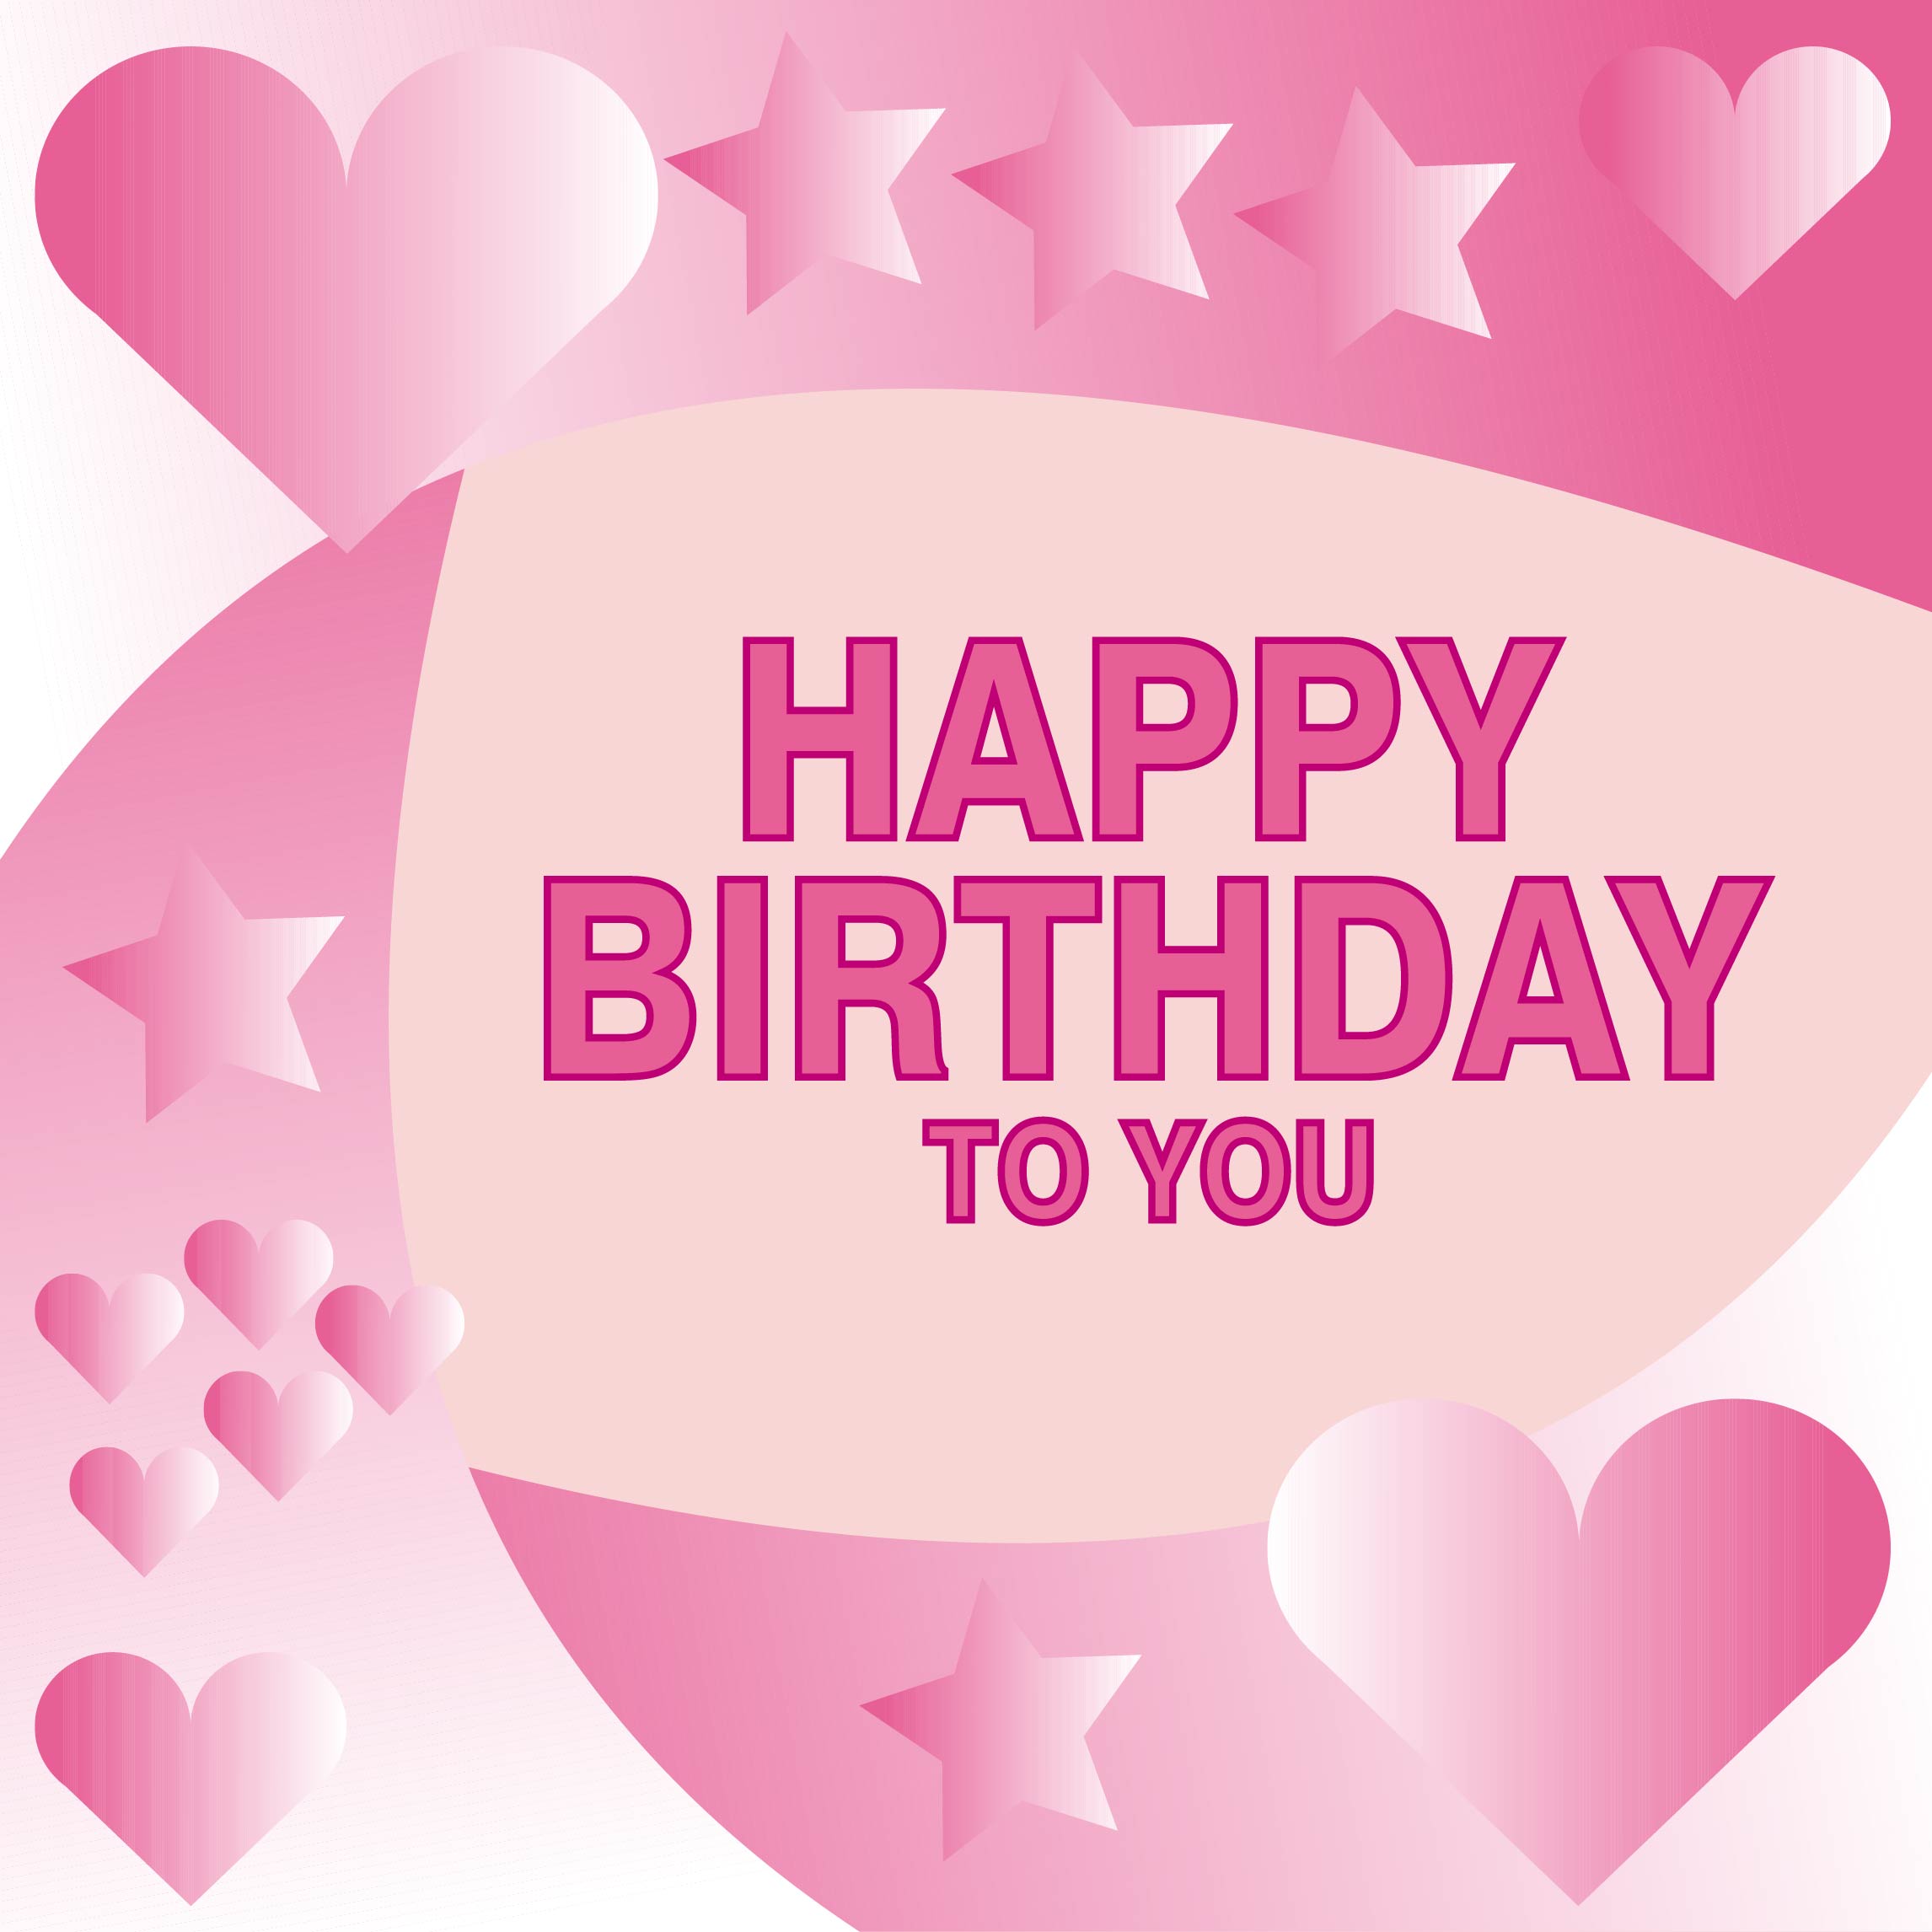 Happy Birthday Card with hearts, stars, and lovely color HD Pictures in JPG, AI and EPS formats cover image.